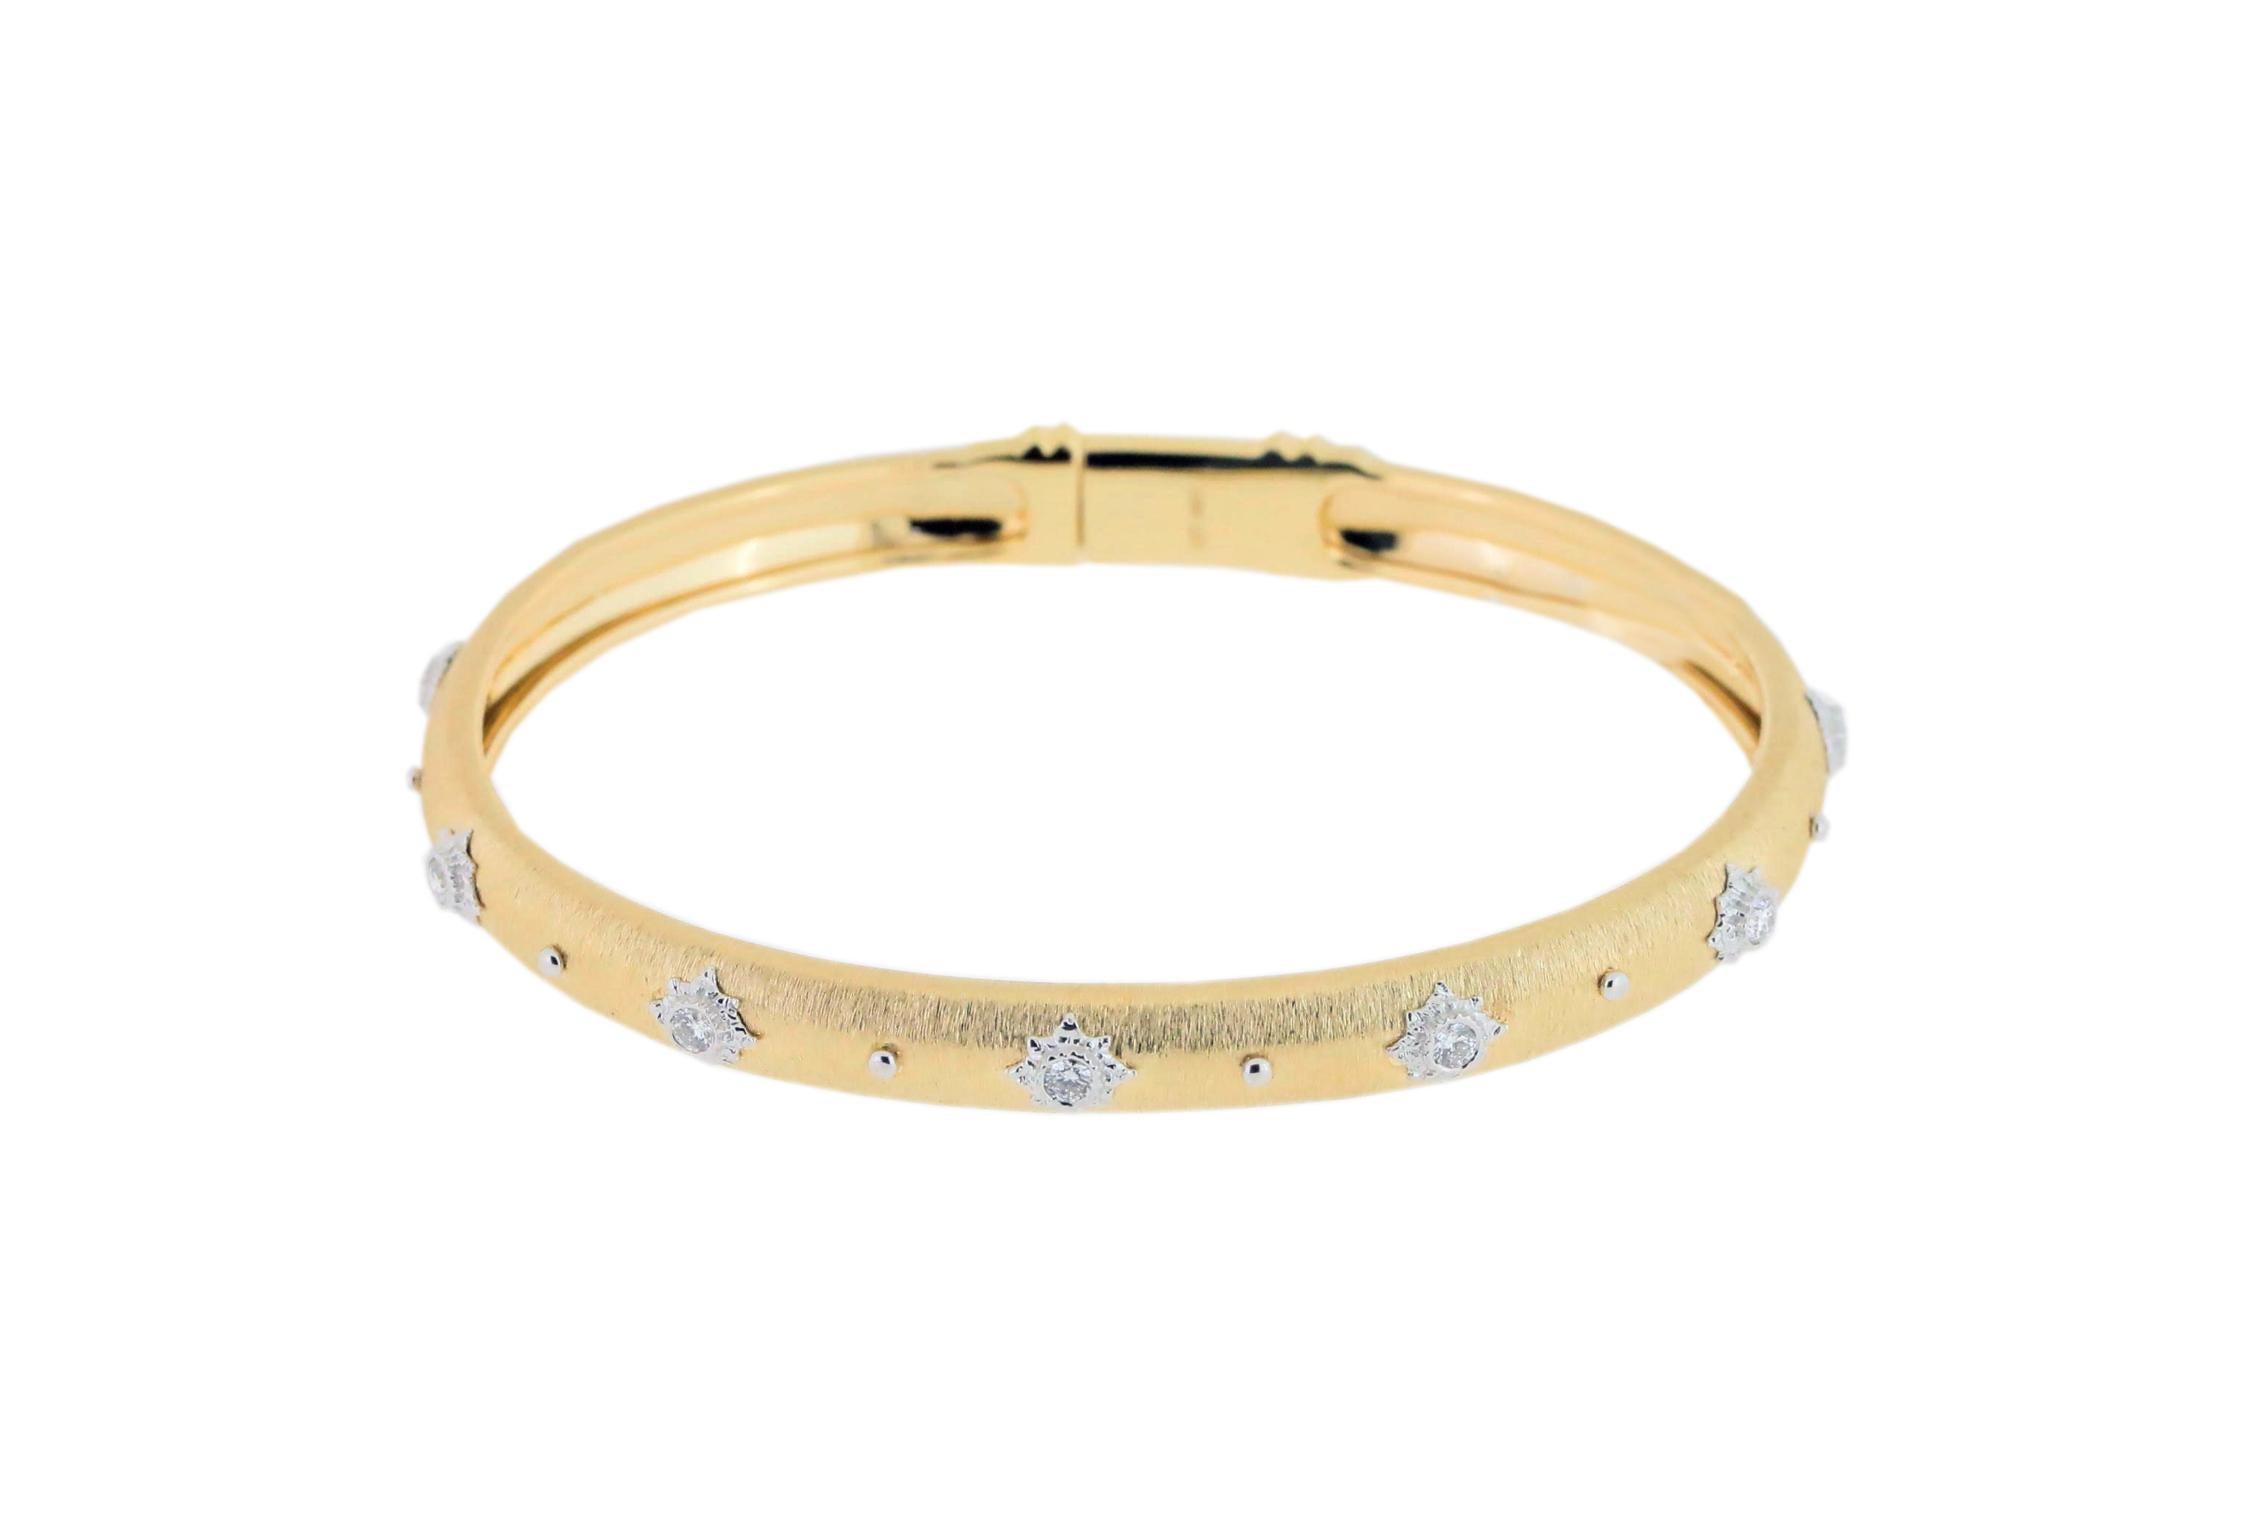 Goddess A1586-A5ZZ, 18K White and Yellow Gold Bangle with Diamonds

18K White and Yellow Gold - 12.25gm
7 Round Diamonds -0.35c
Flowers in White Gold
Bracelet size - 45x55 mm  (1.77x2.16 inch)